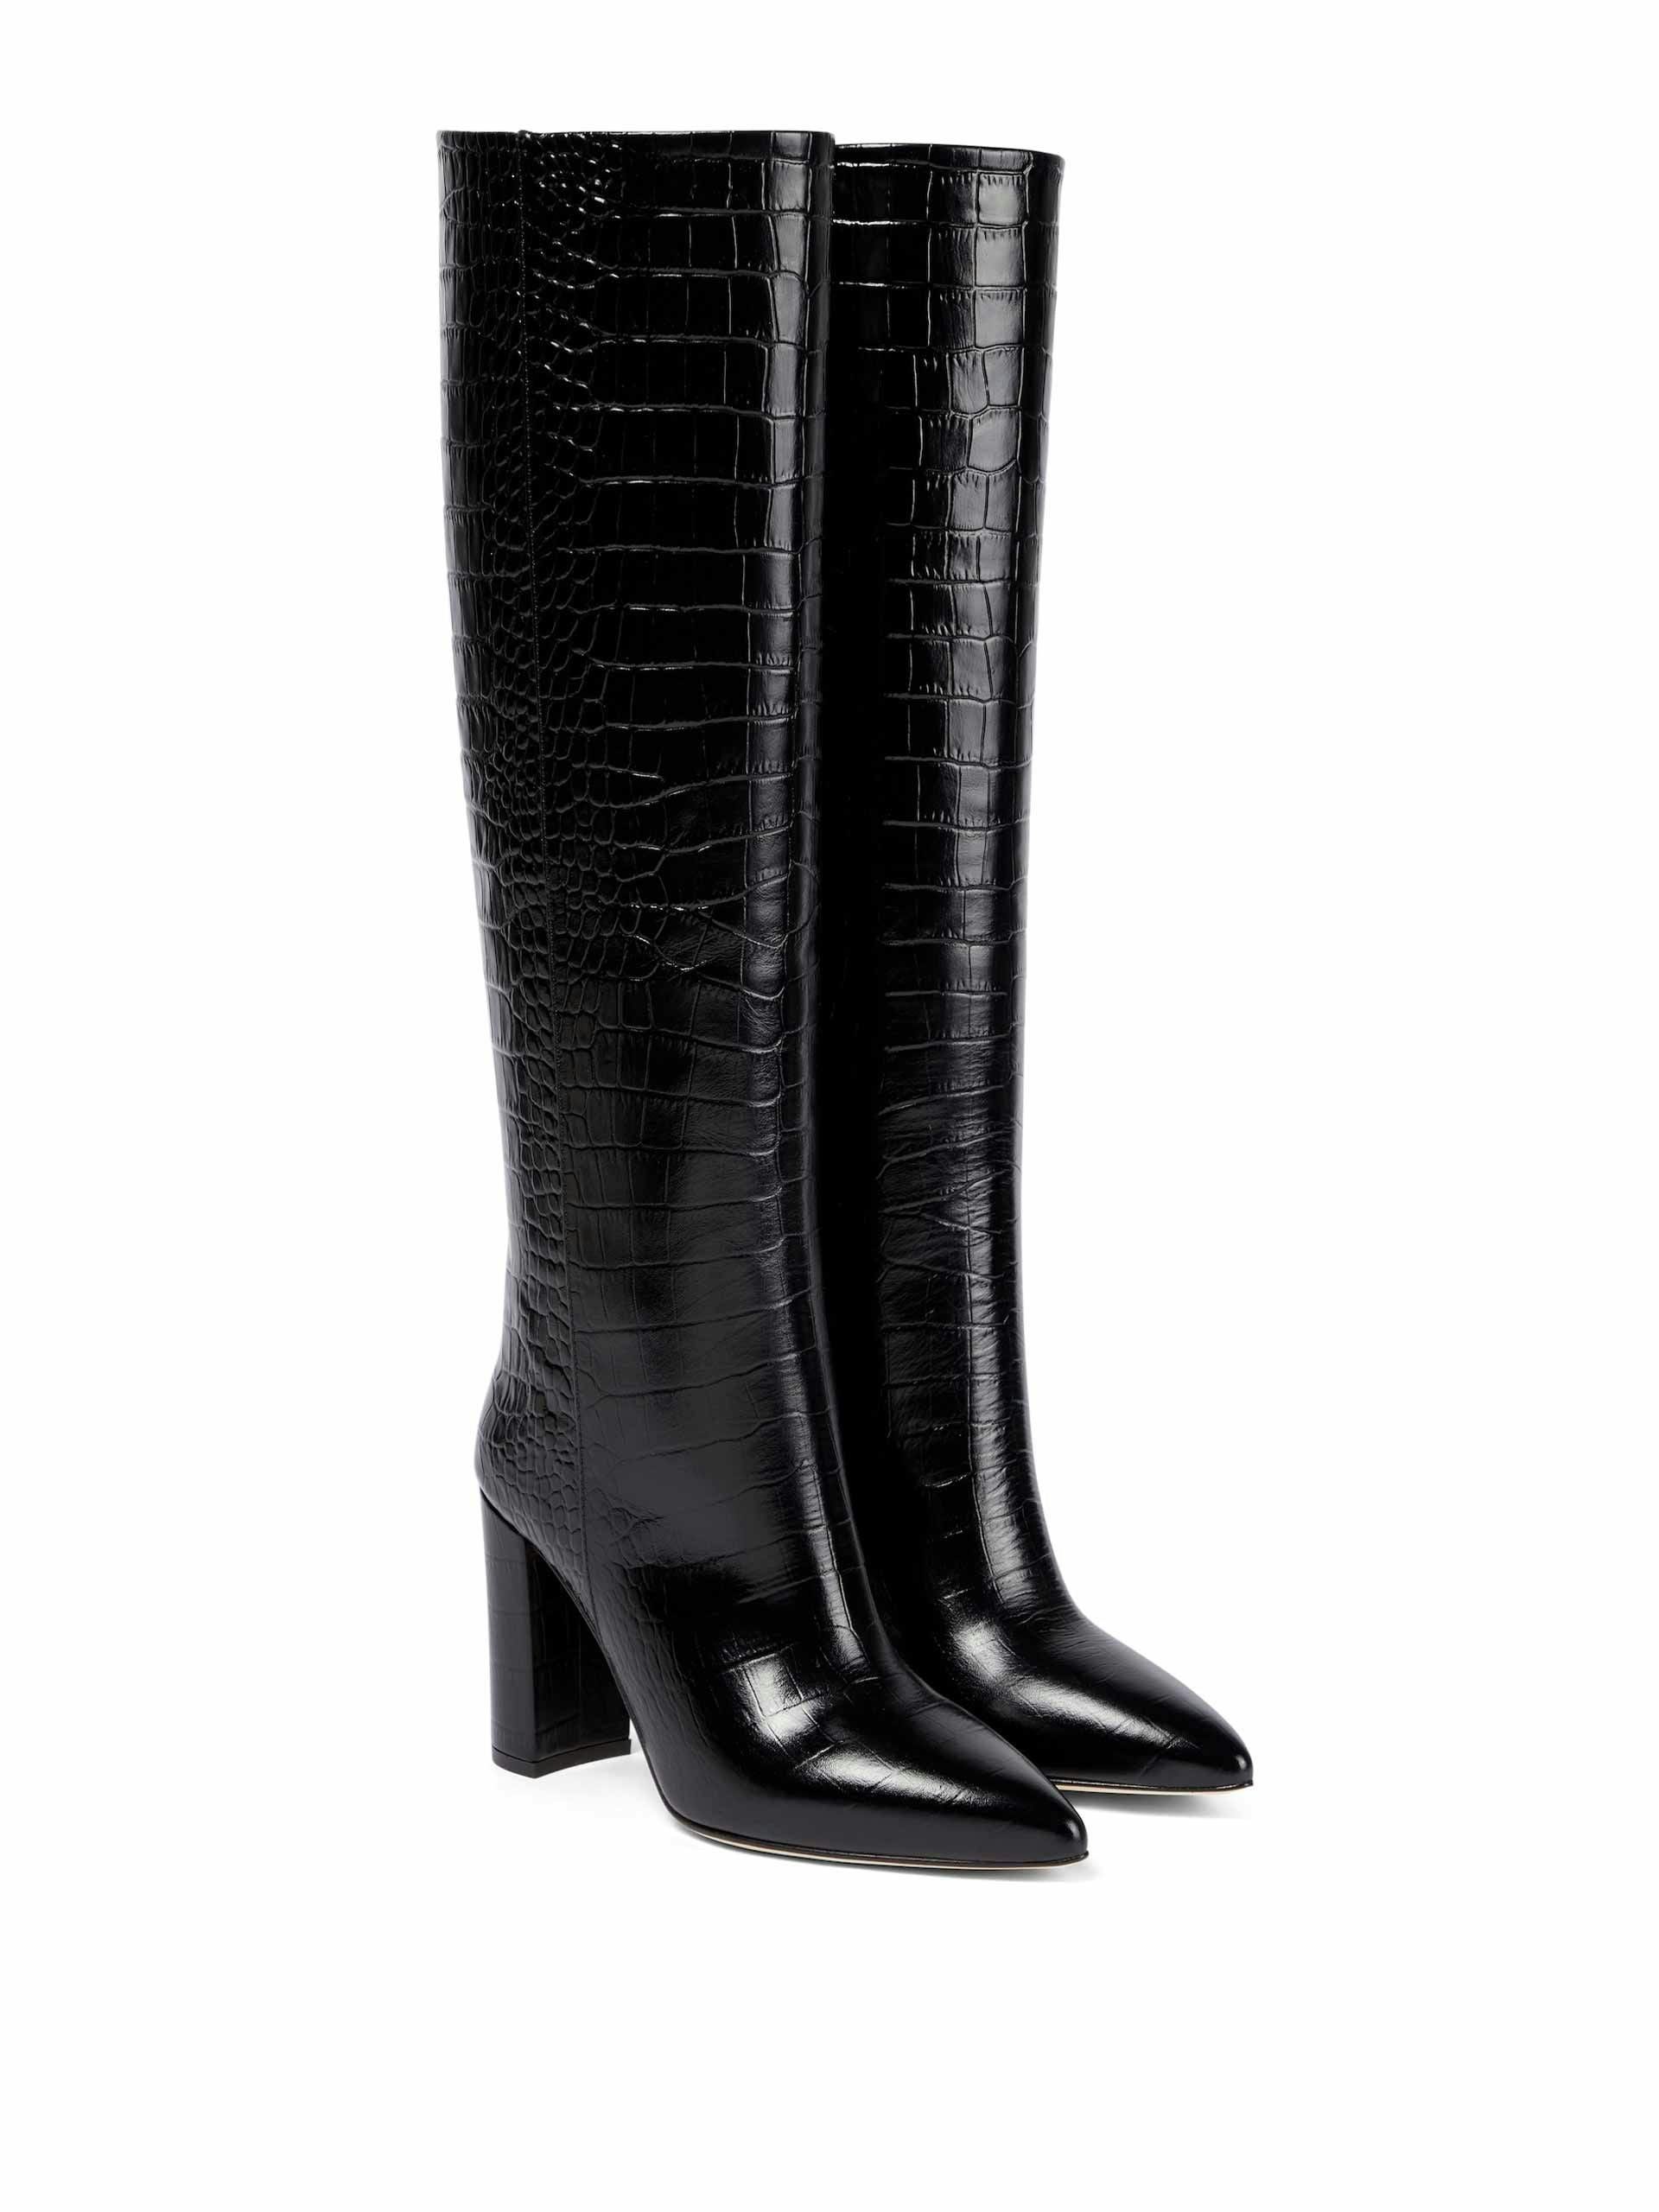 Croc-effect leather knee high boots